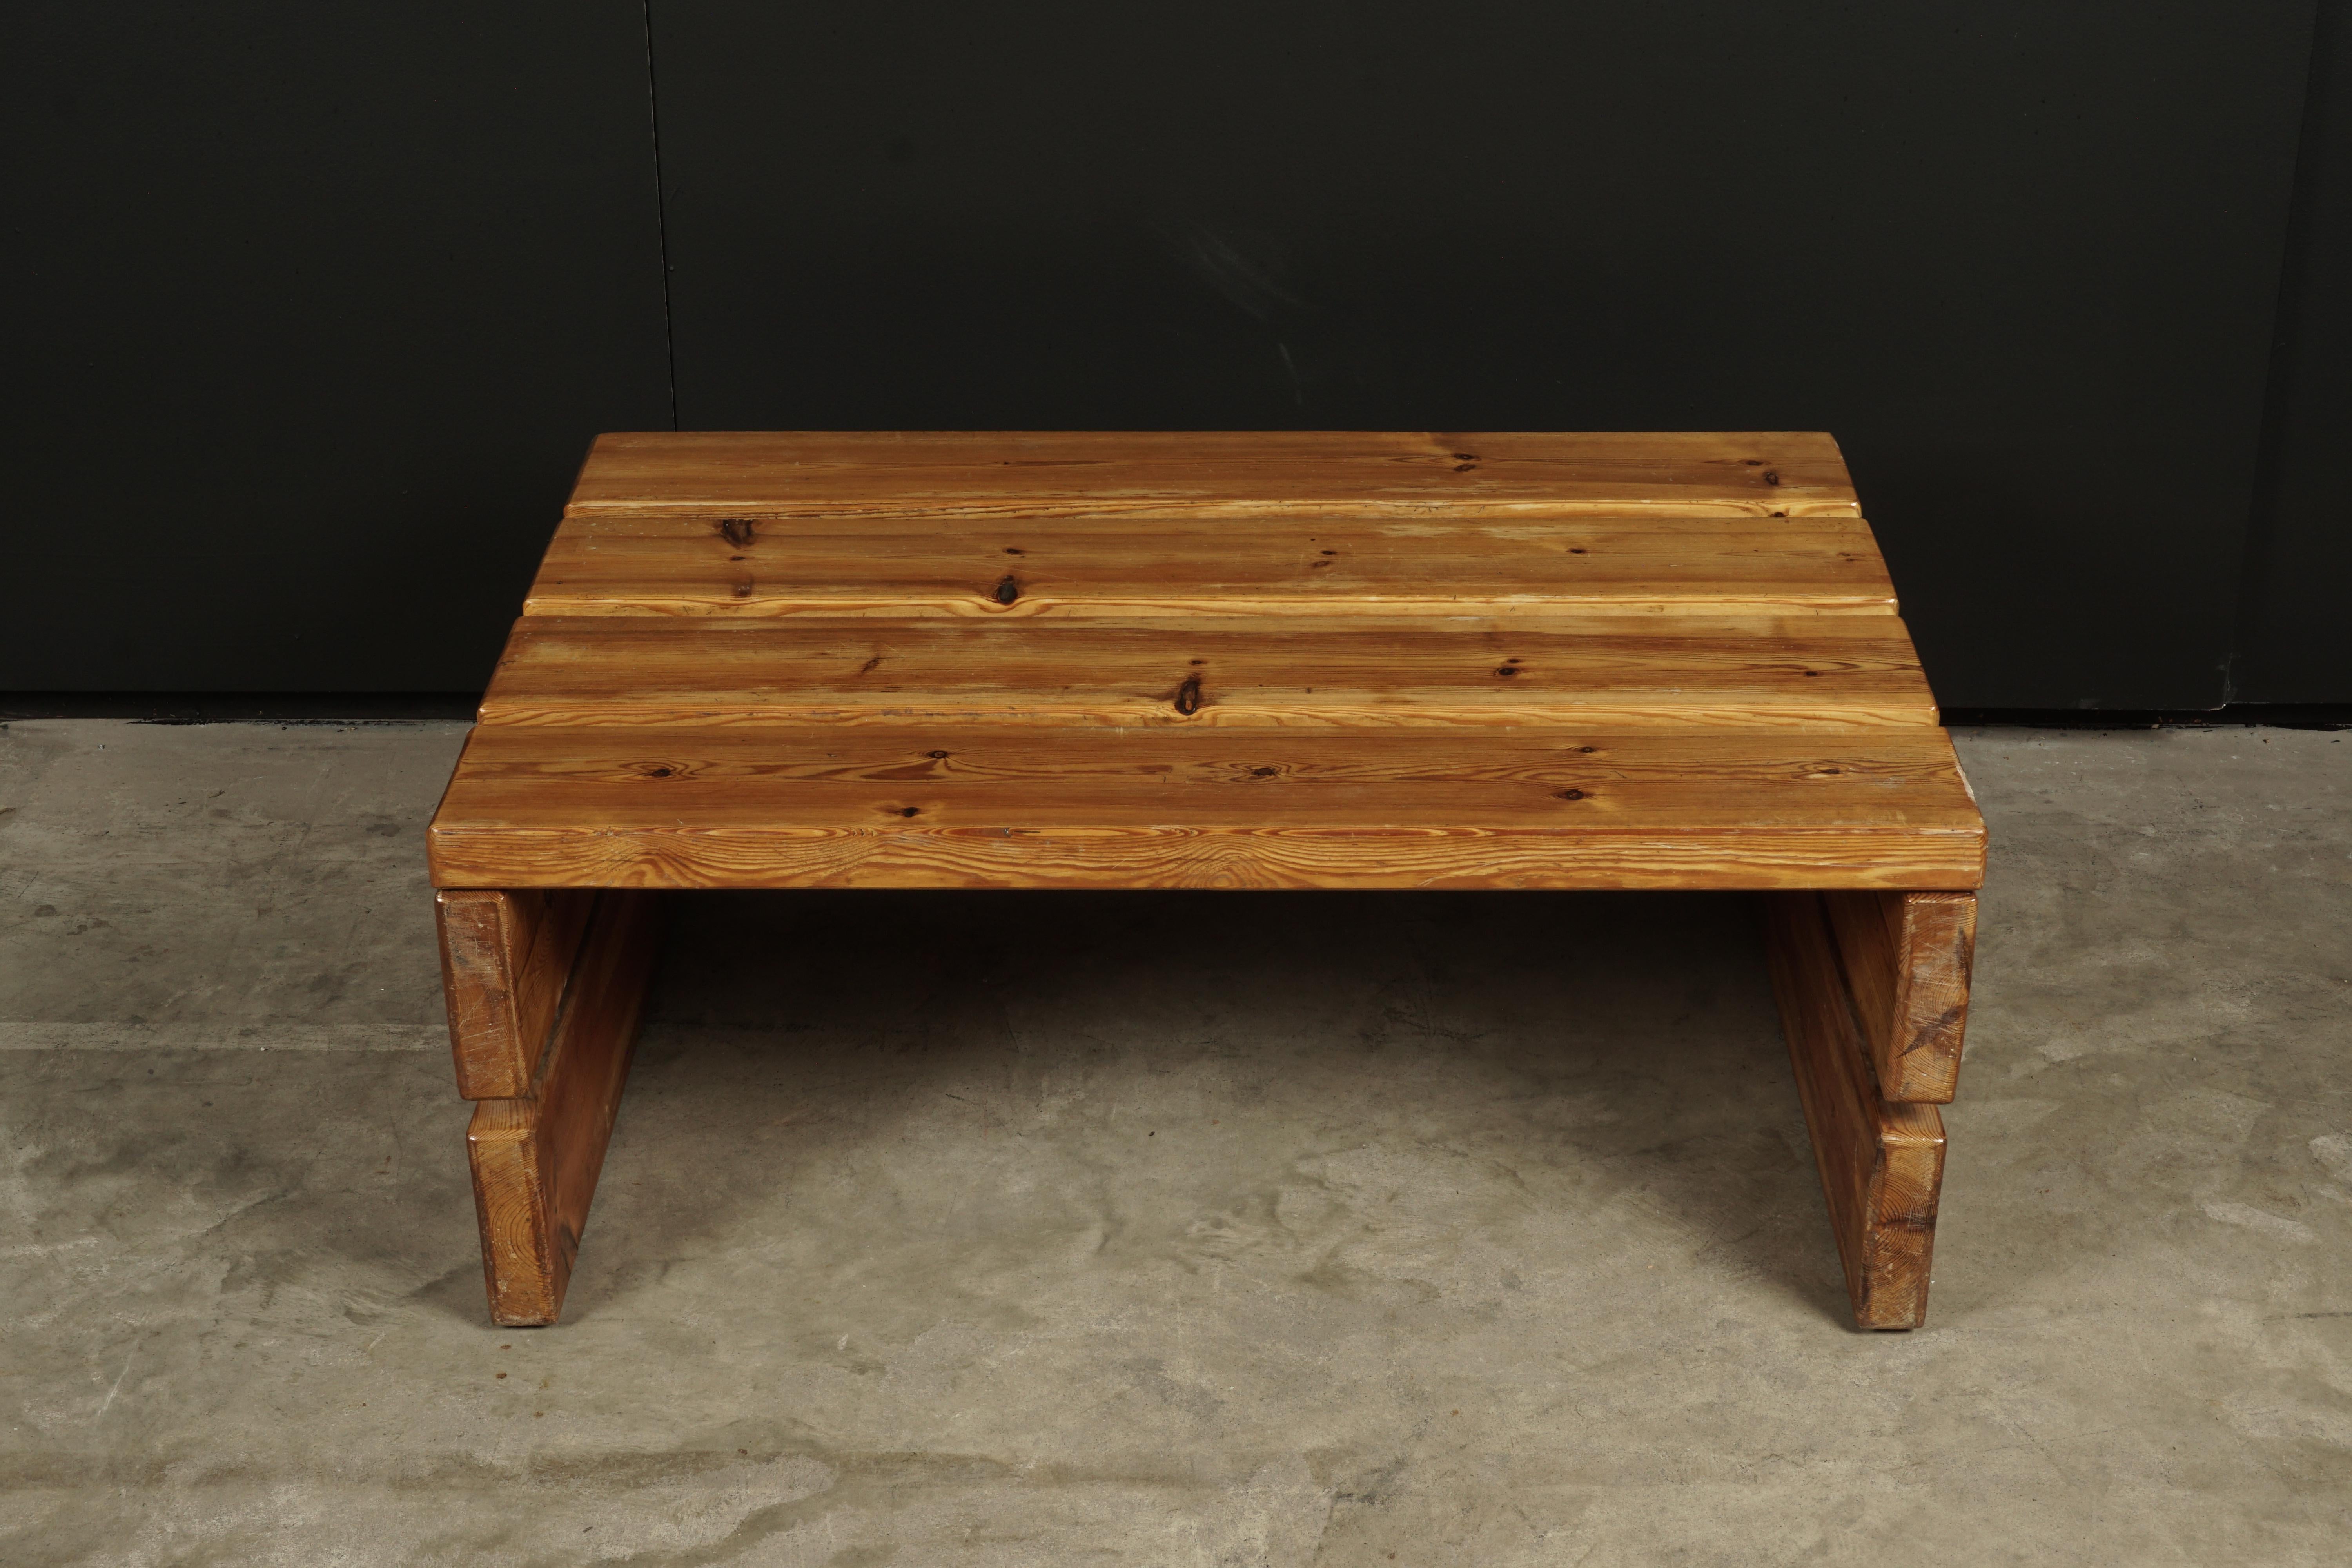 Vintage Solid pine coffee table from Sweden, circa 1970. Solid pine construction with light patina.